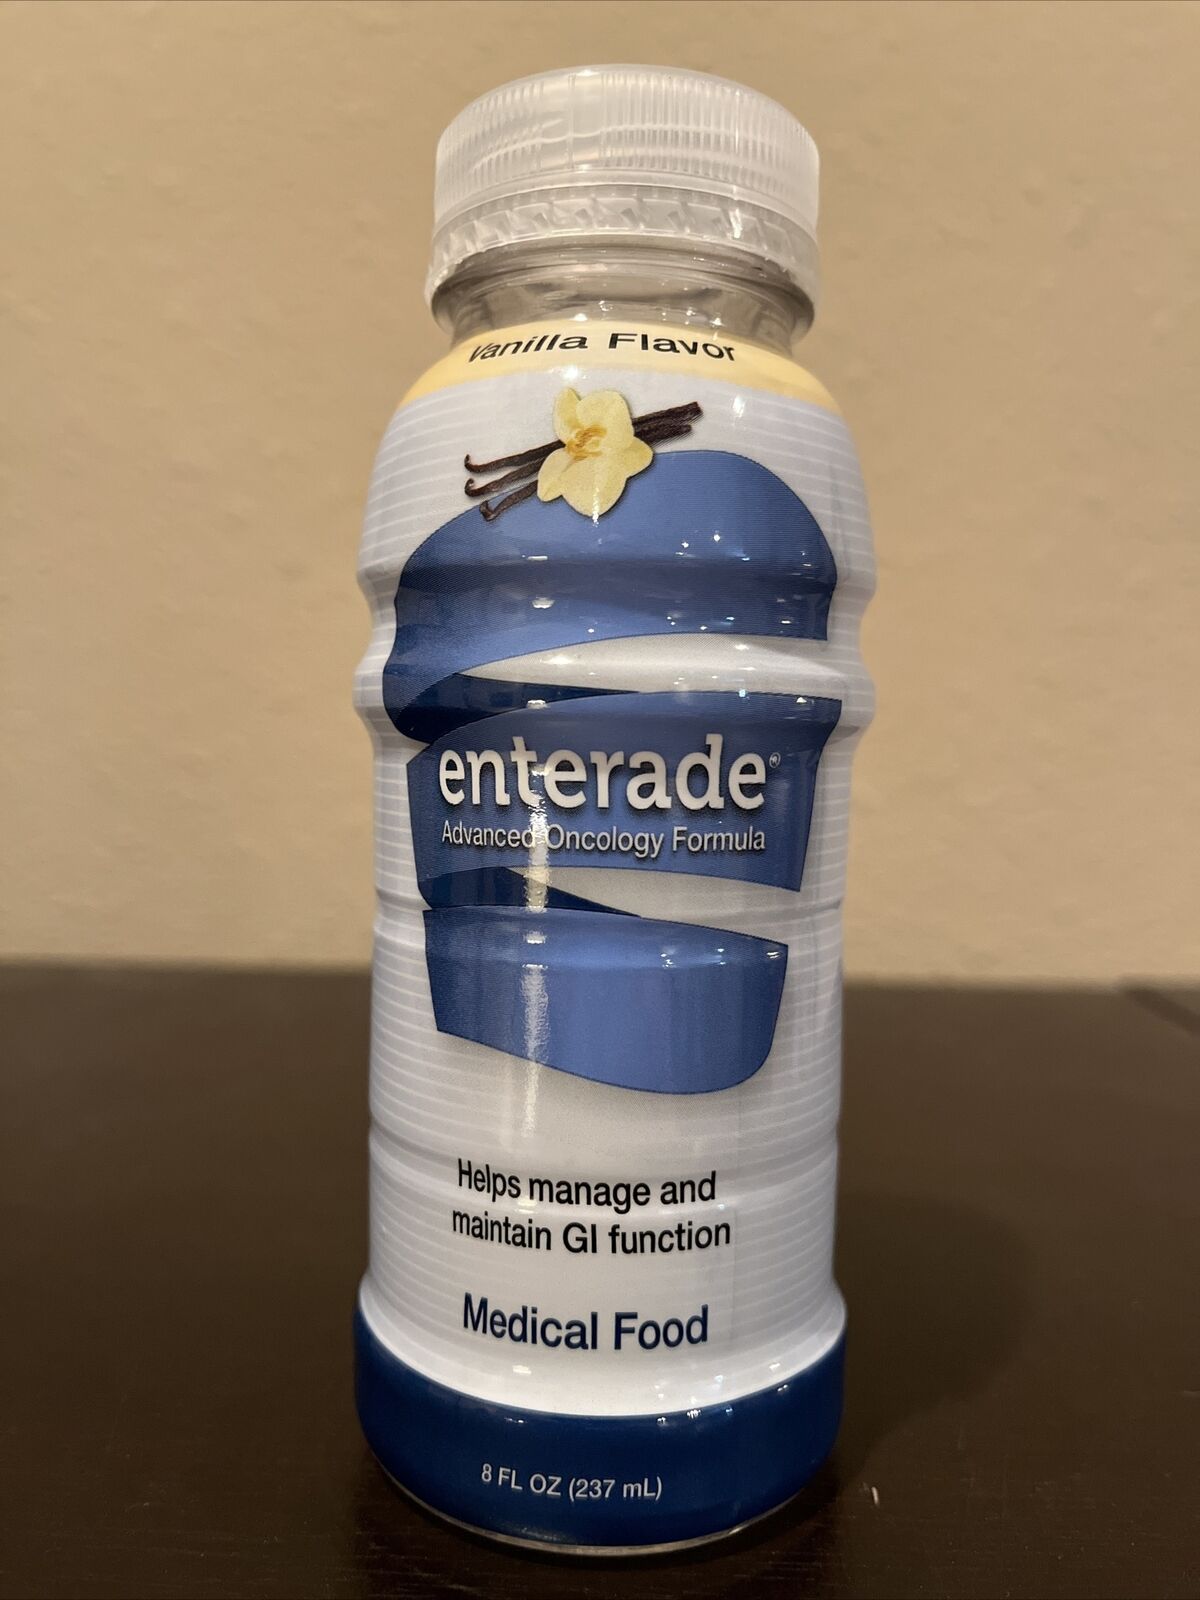 enterade AO 12 Bottles Vanilla, Formulated to Reduce Treatment Side Effects